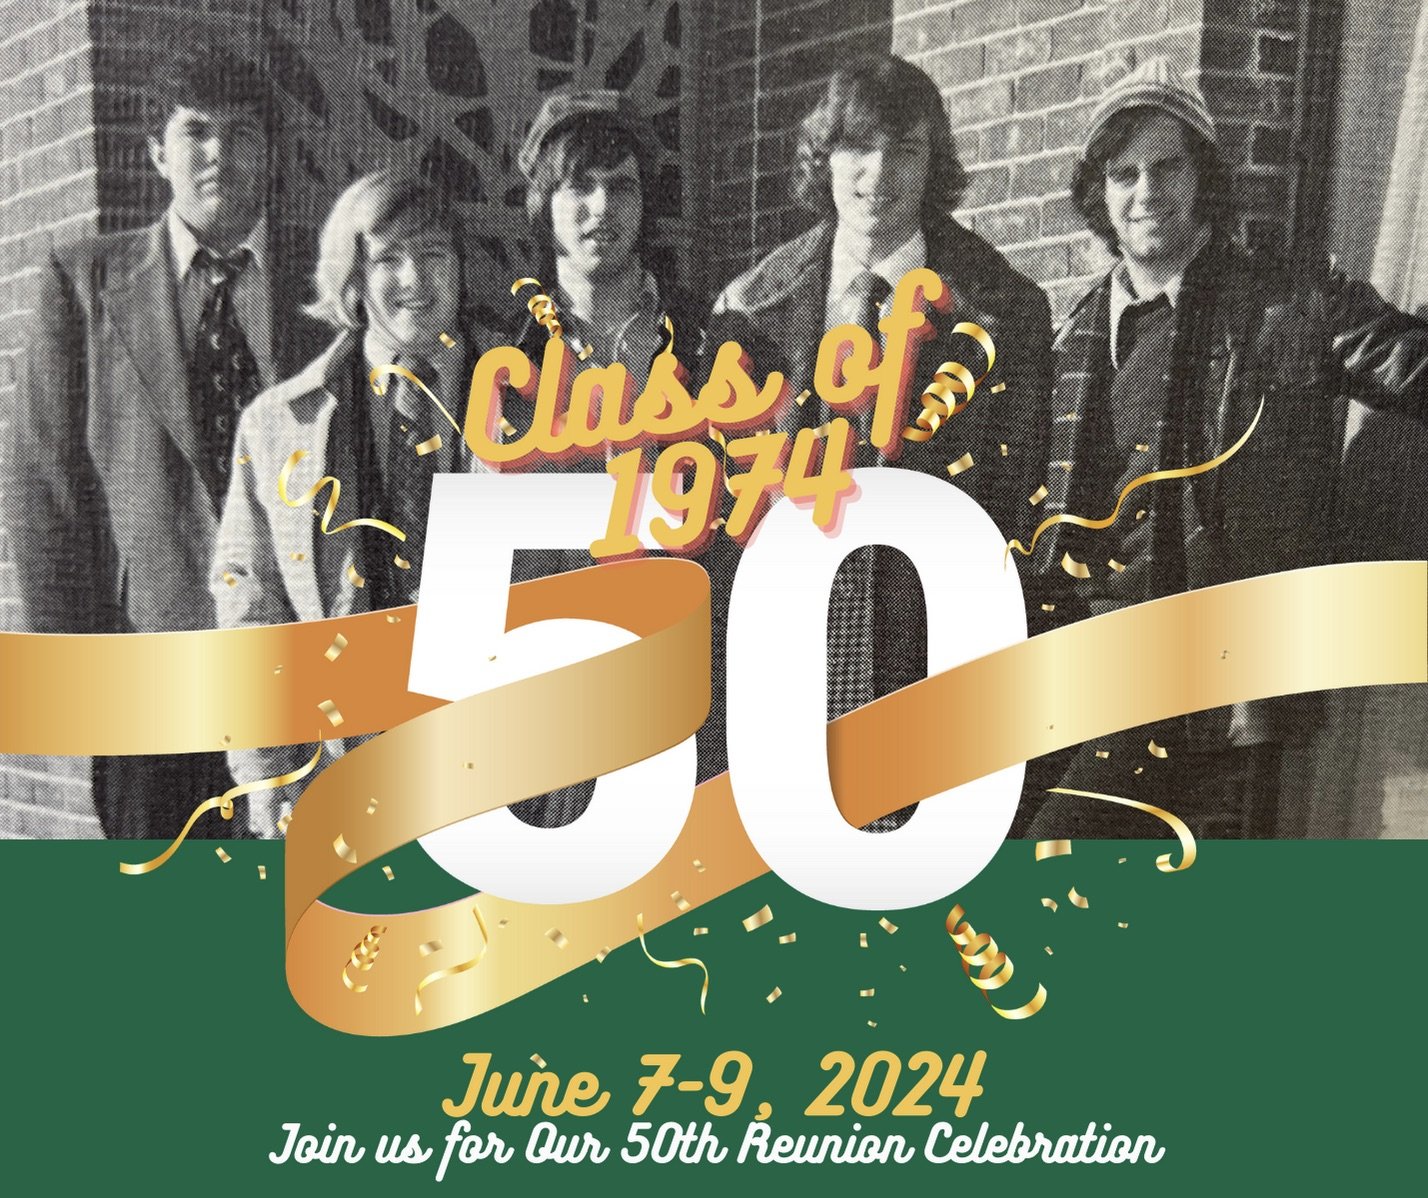 Holy Cross High School's Class of 1974 to Celebrate 50th Reunion in June 